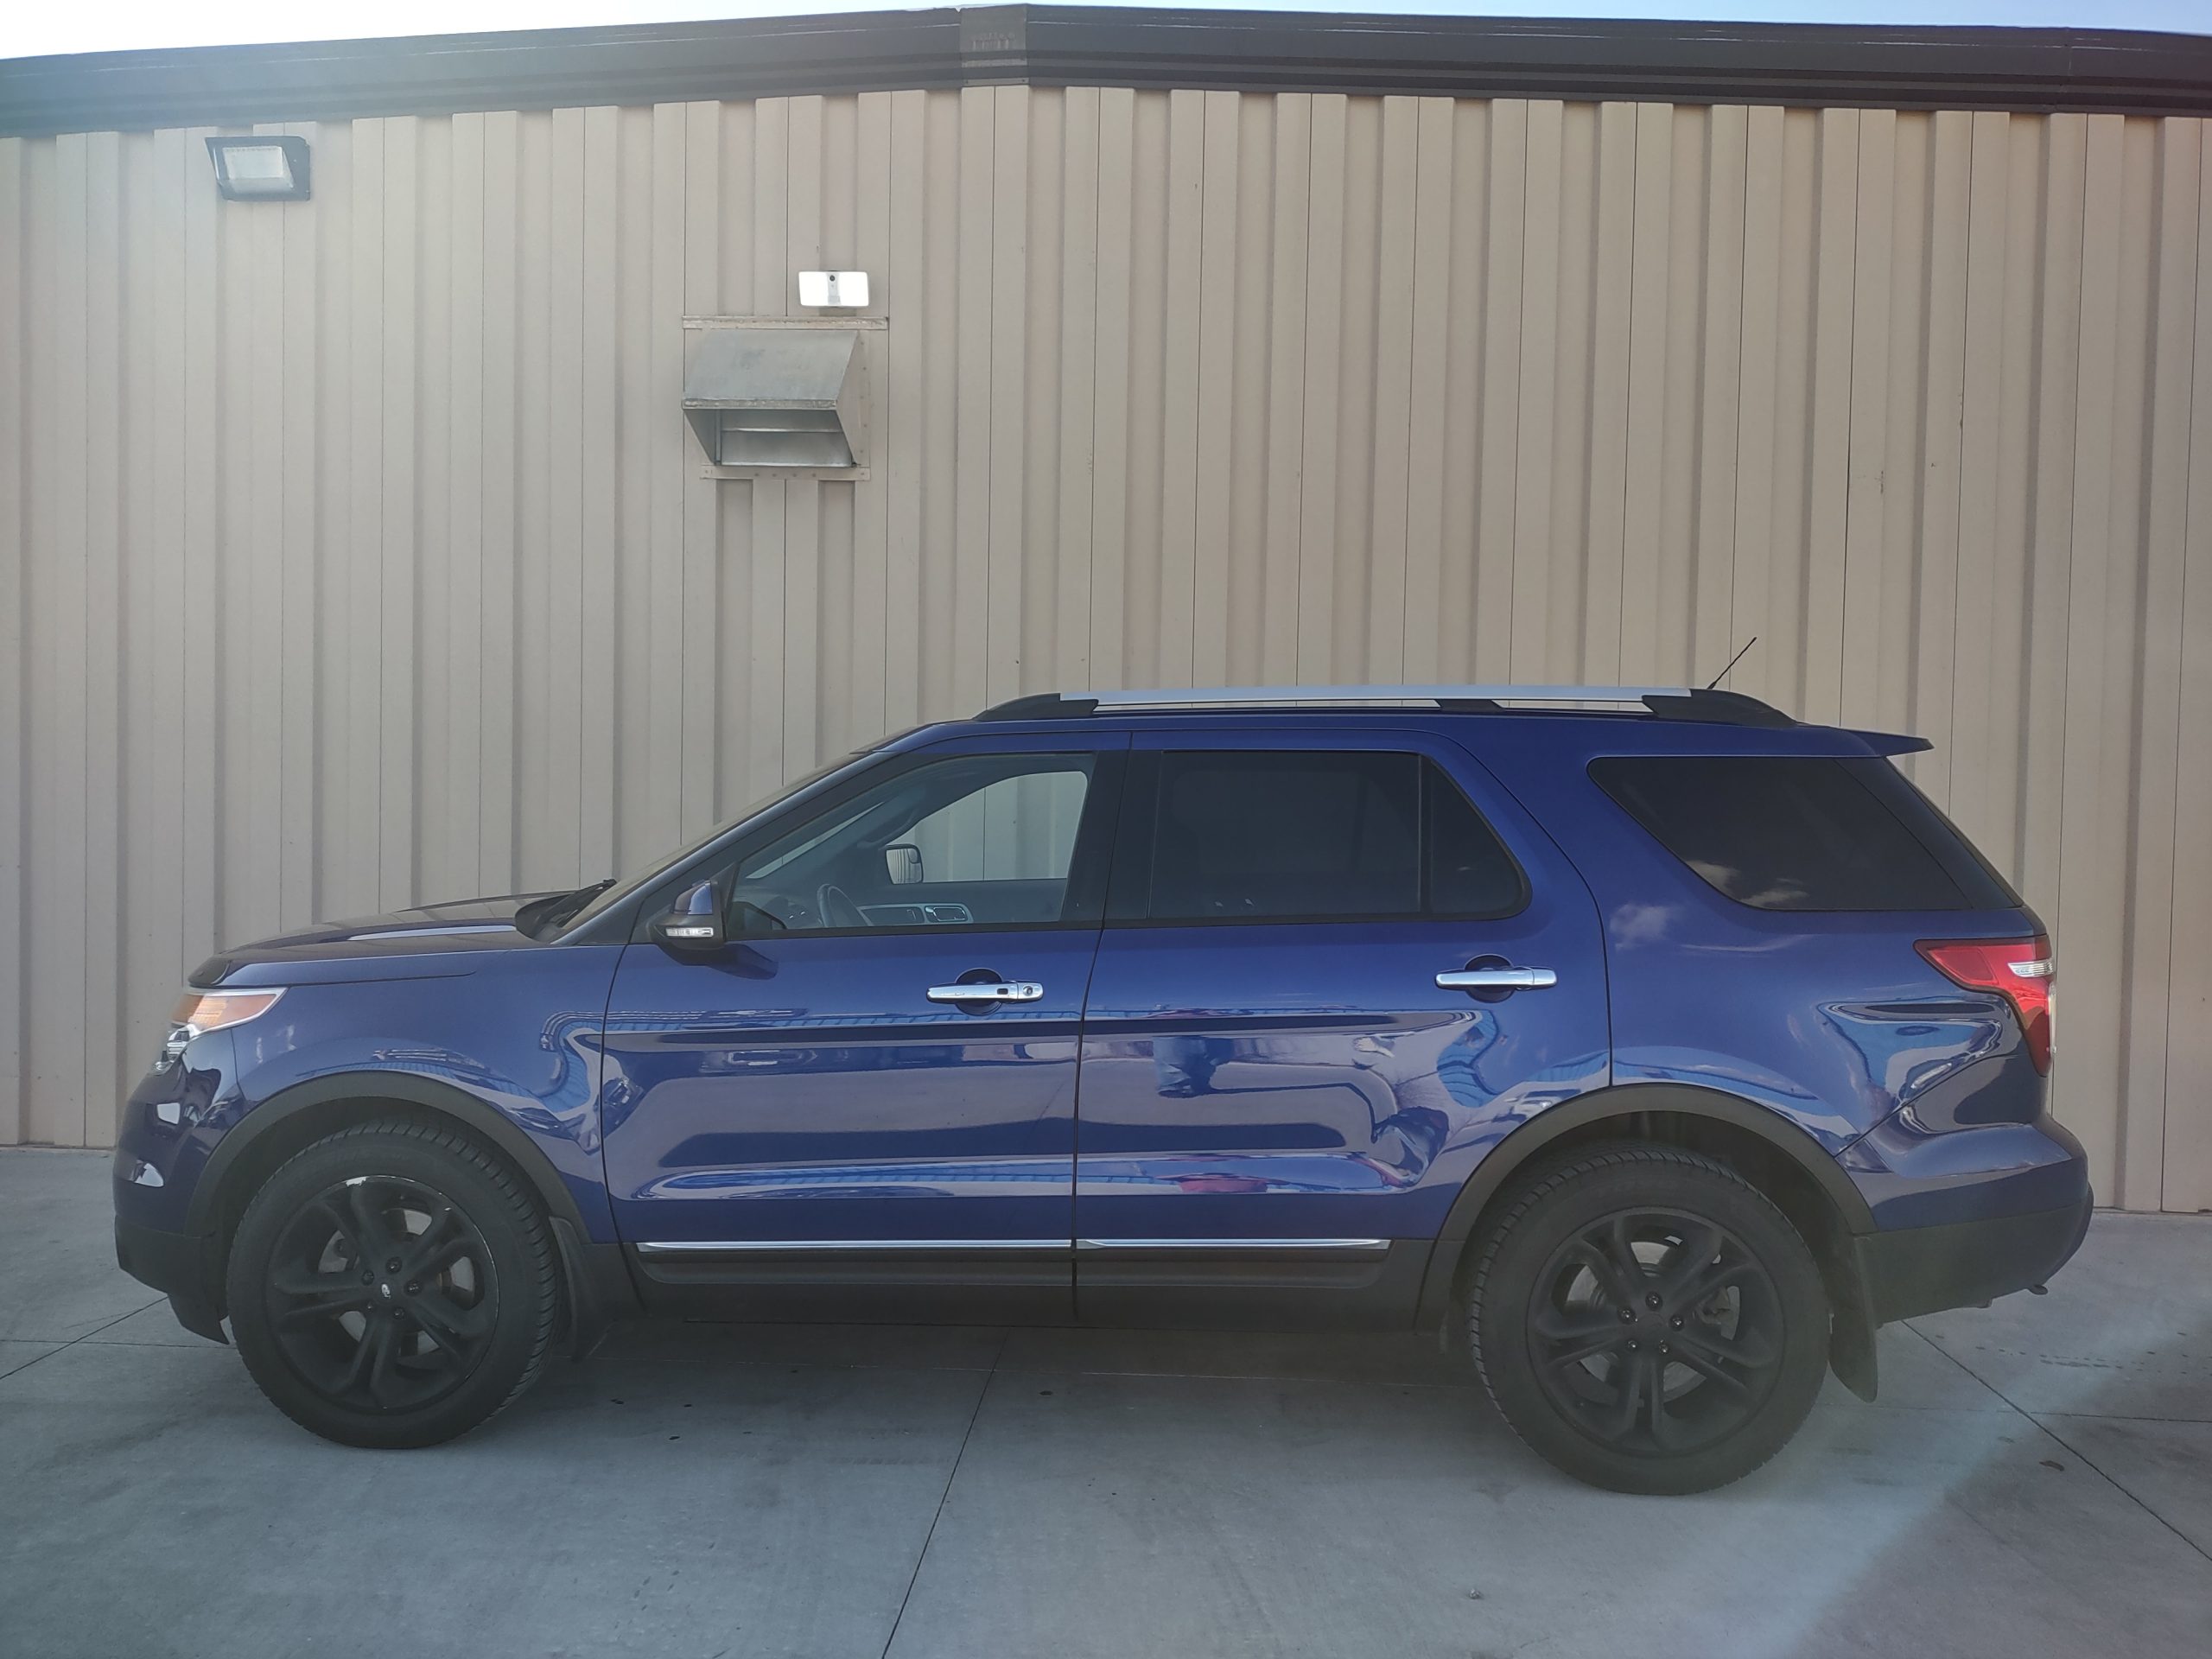 Used 2013 Ford Explorer Limited SUV for sale in 